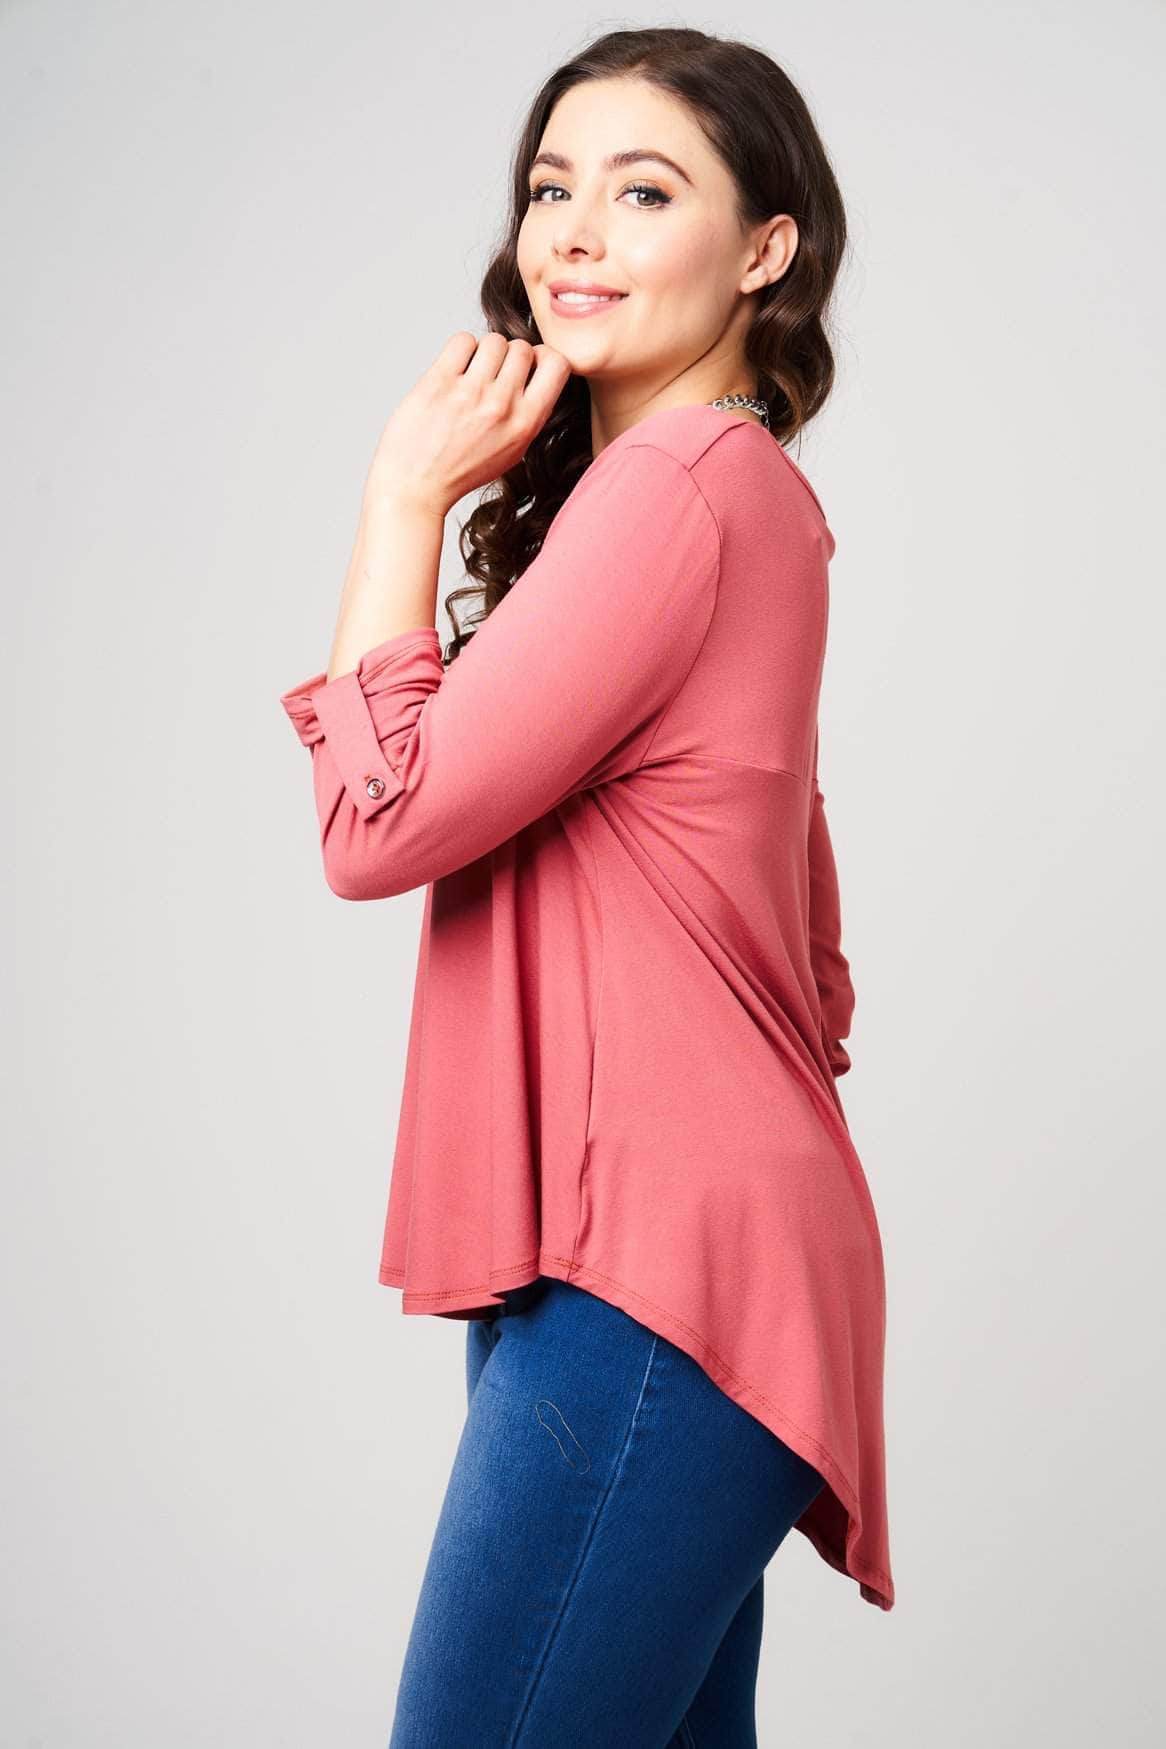 Saloos Top Essential Loose Top with Necklace